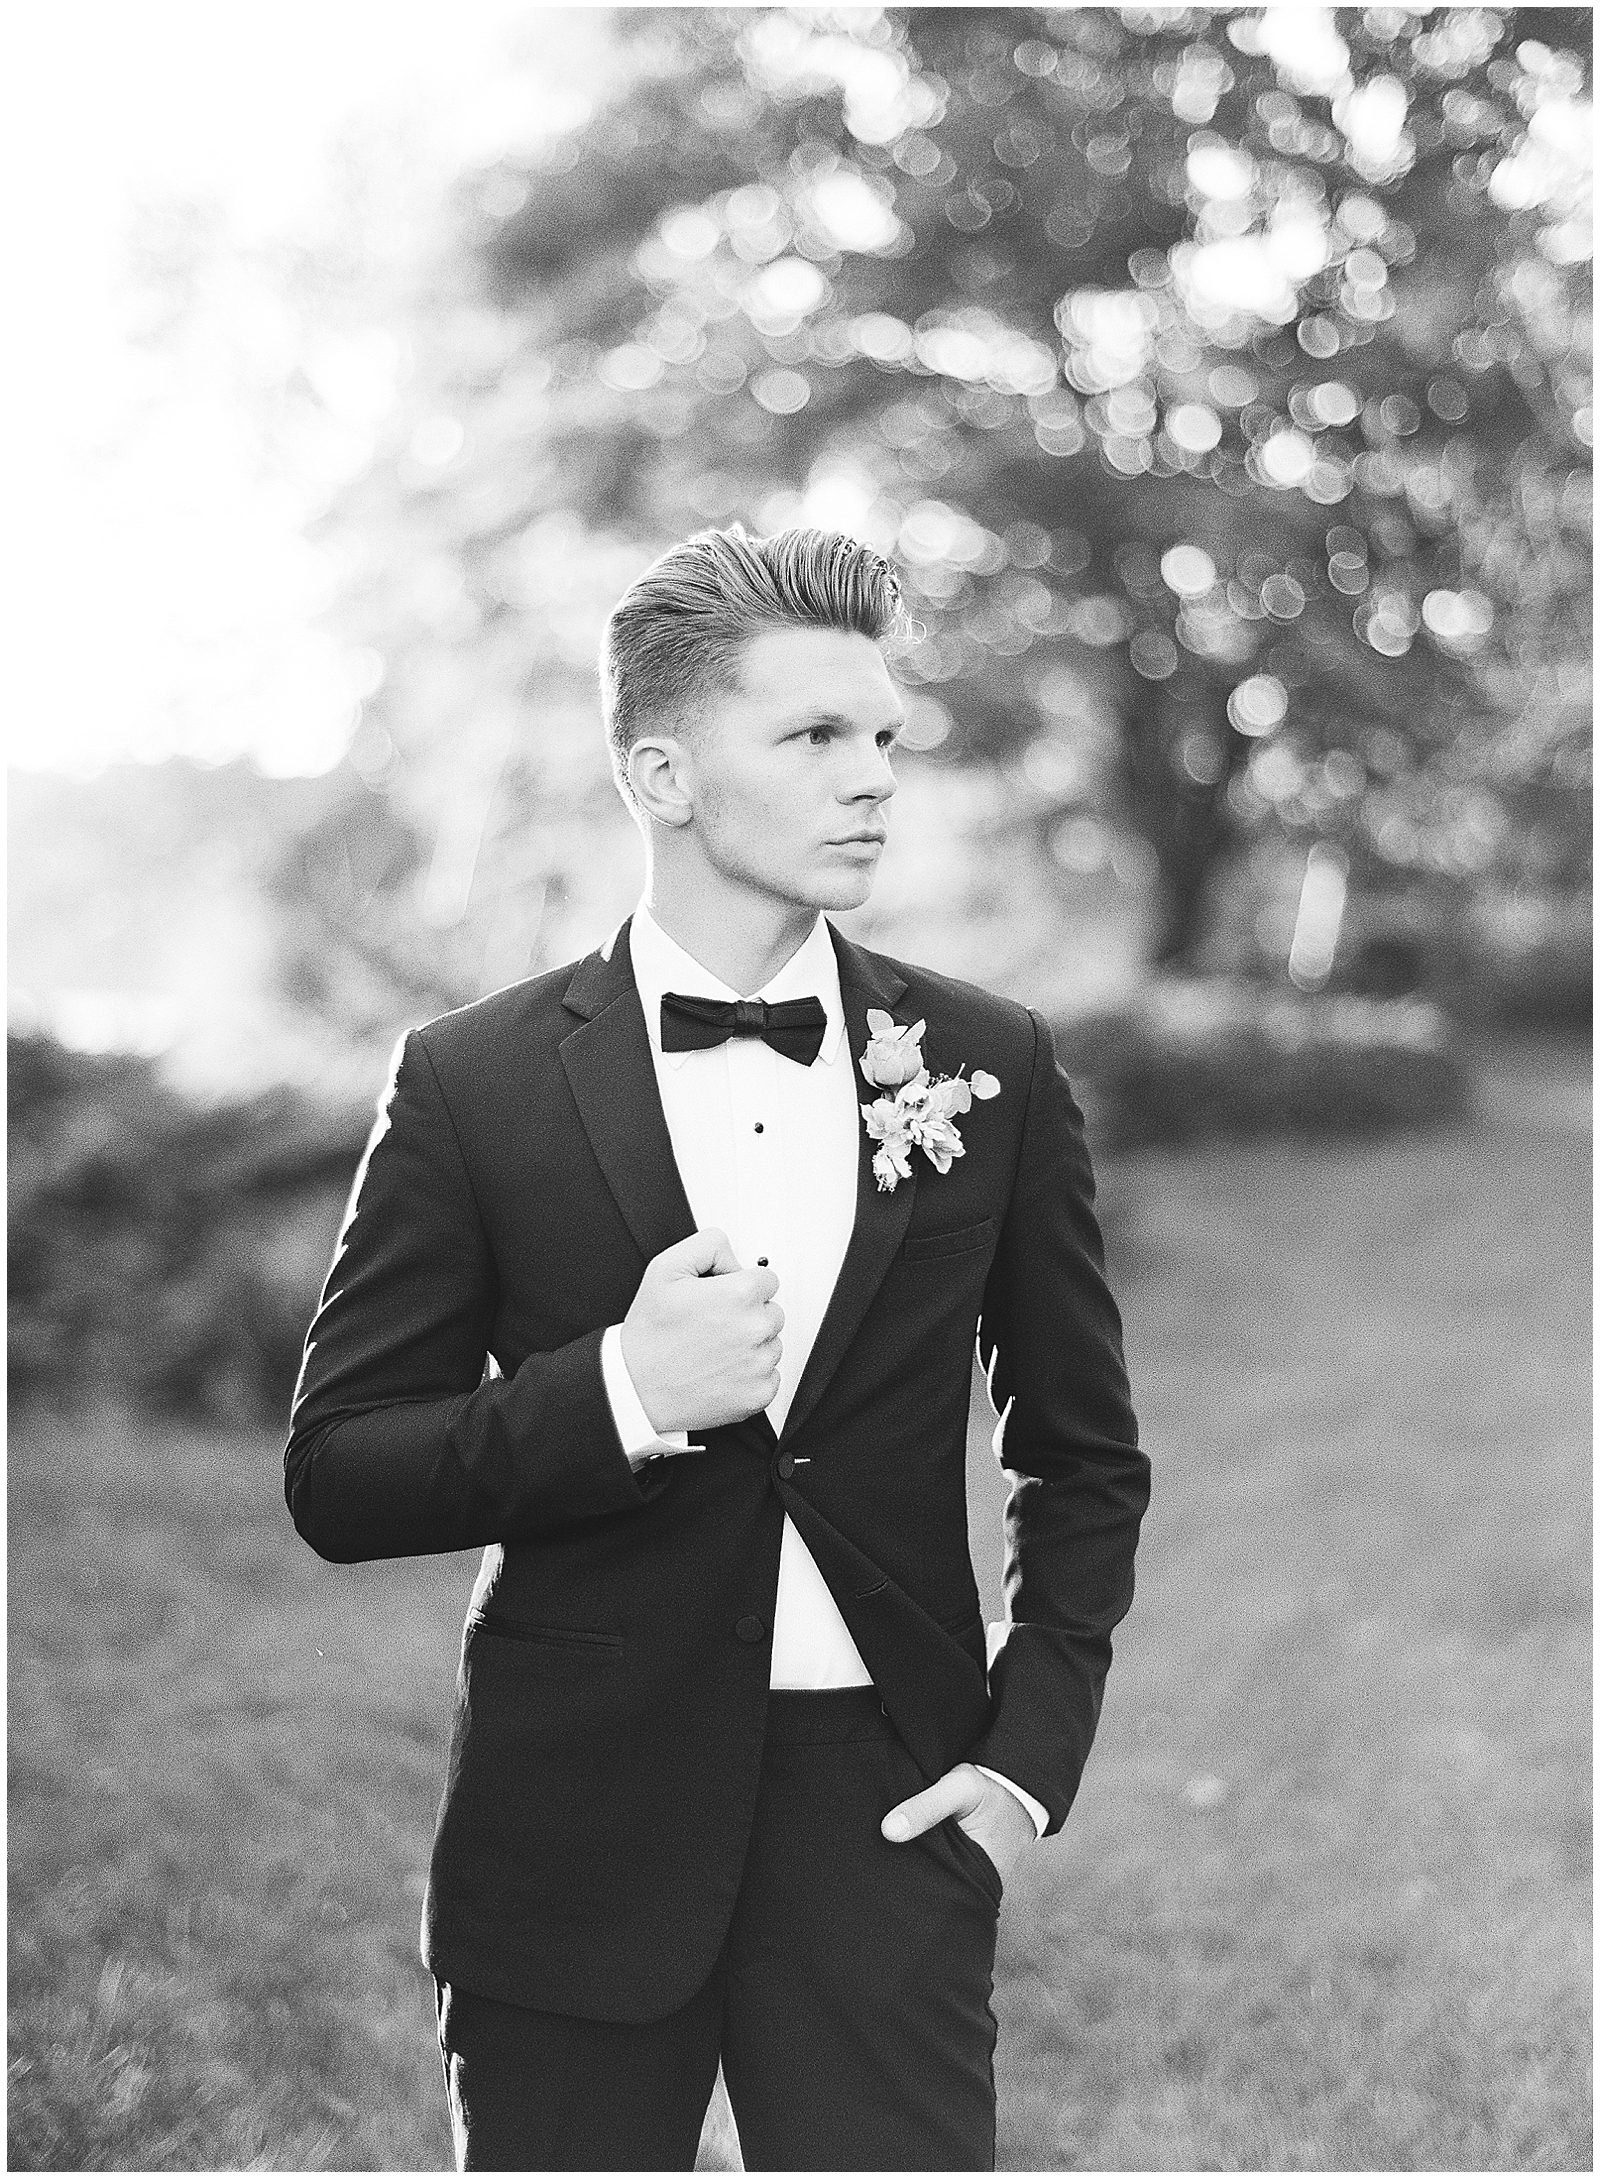 Tennessee Wedding Photographer Captures Black and White of Groom Looking Off Holding Lapel Photo